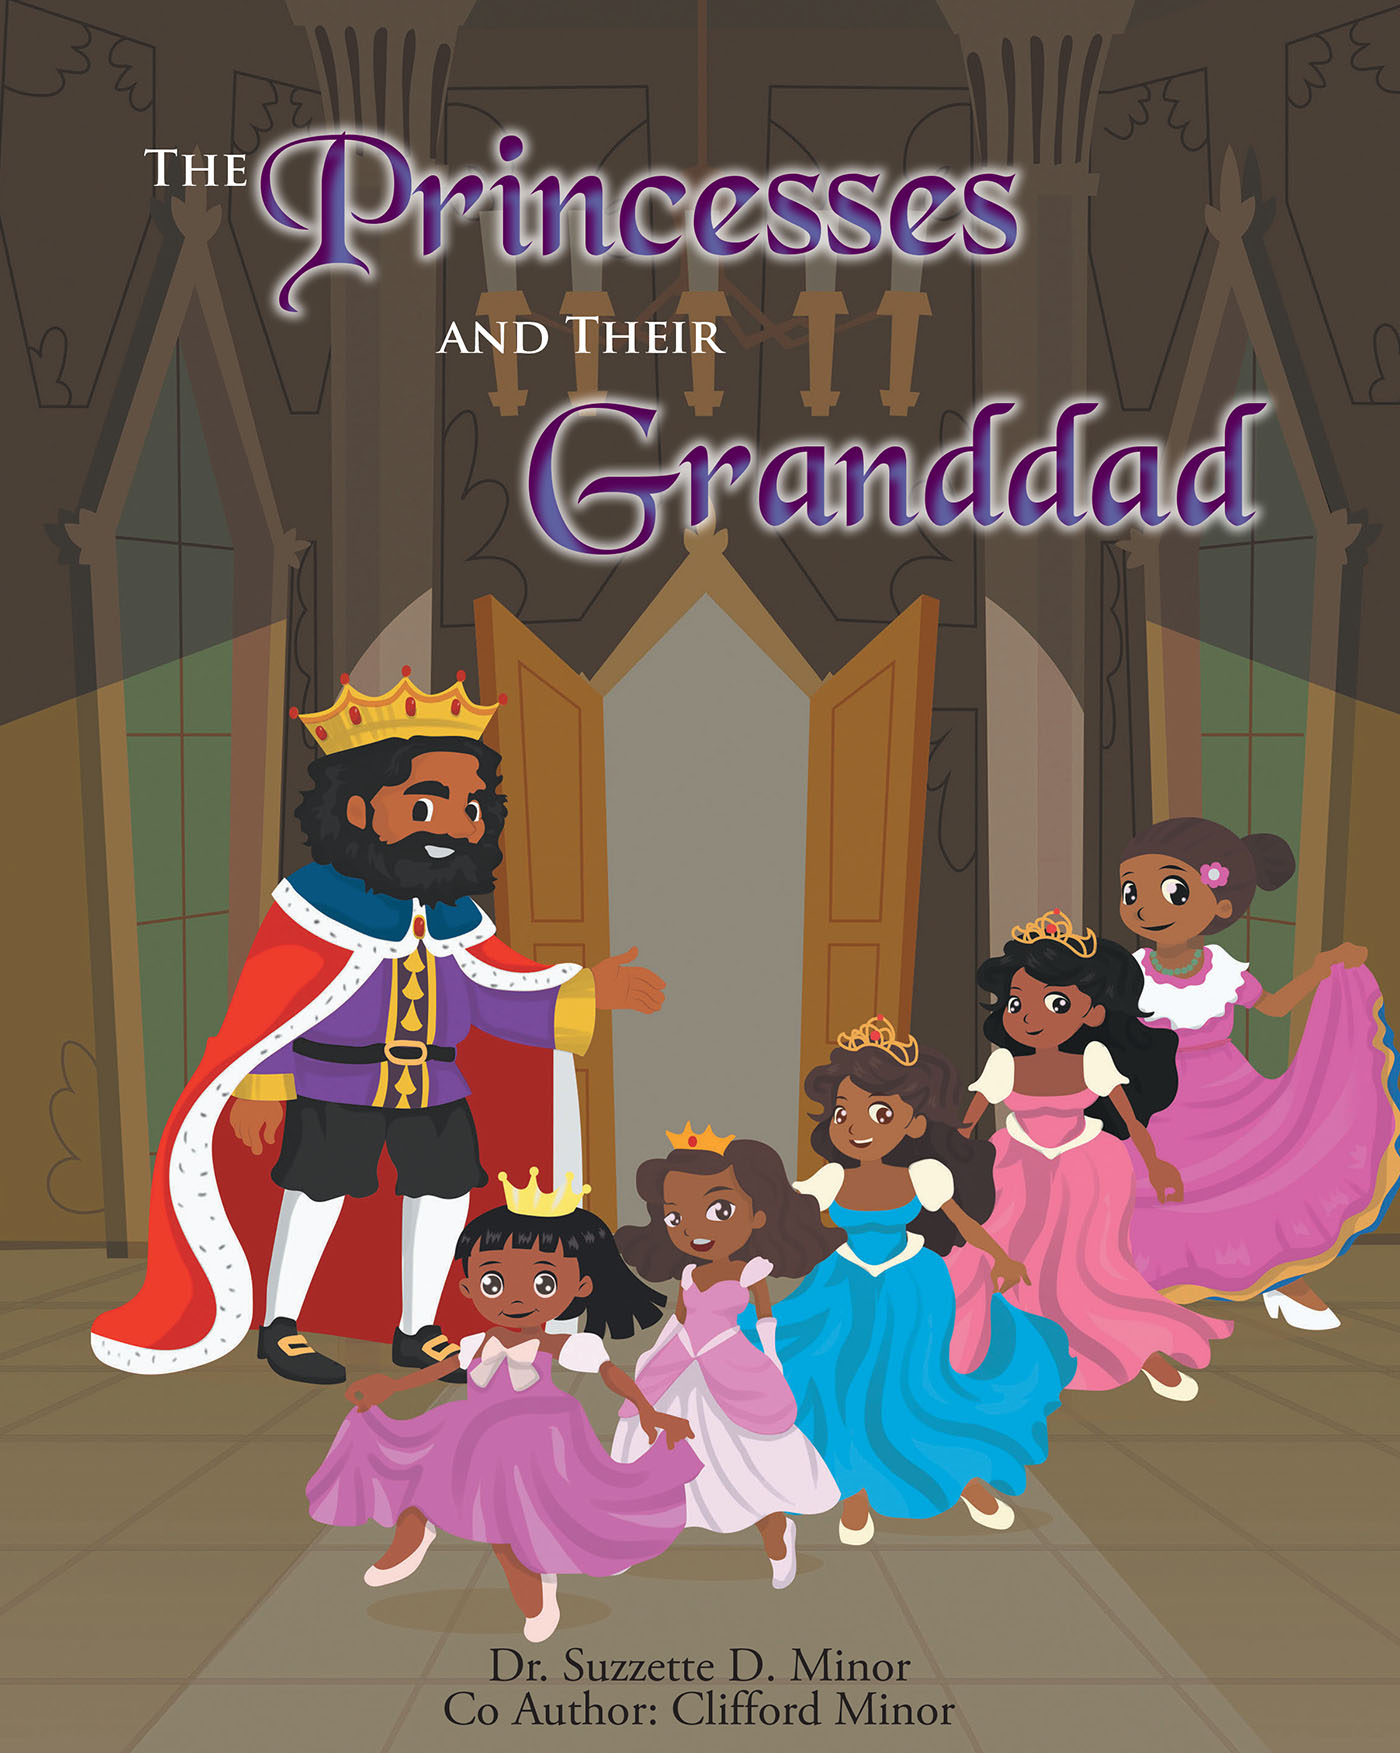 Dr. Suzzette D. Minor and Clifford Minor’s Newly Released "the Princesses and Their Granddad" is a Sweet Story About Family, Faith, and the Importance of Togetherness